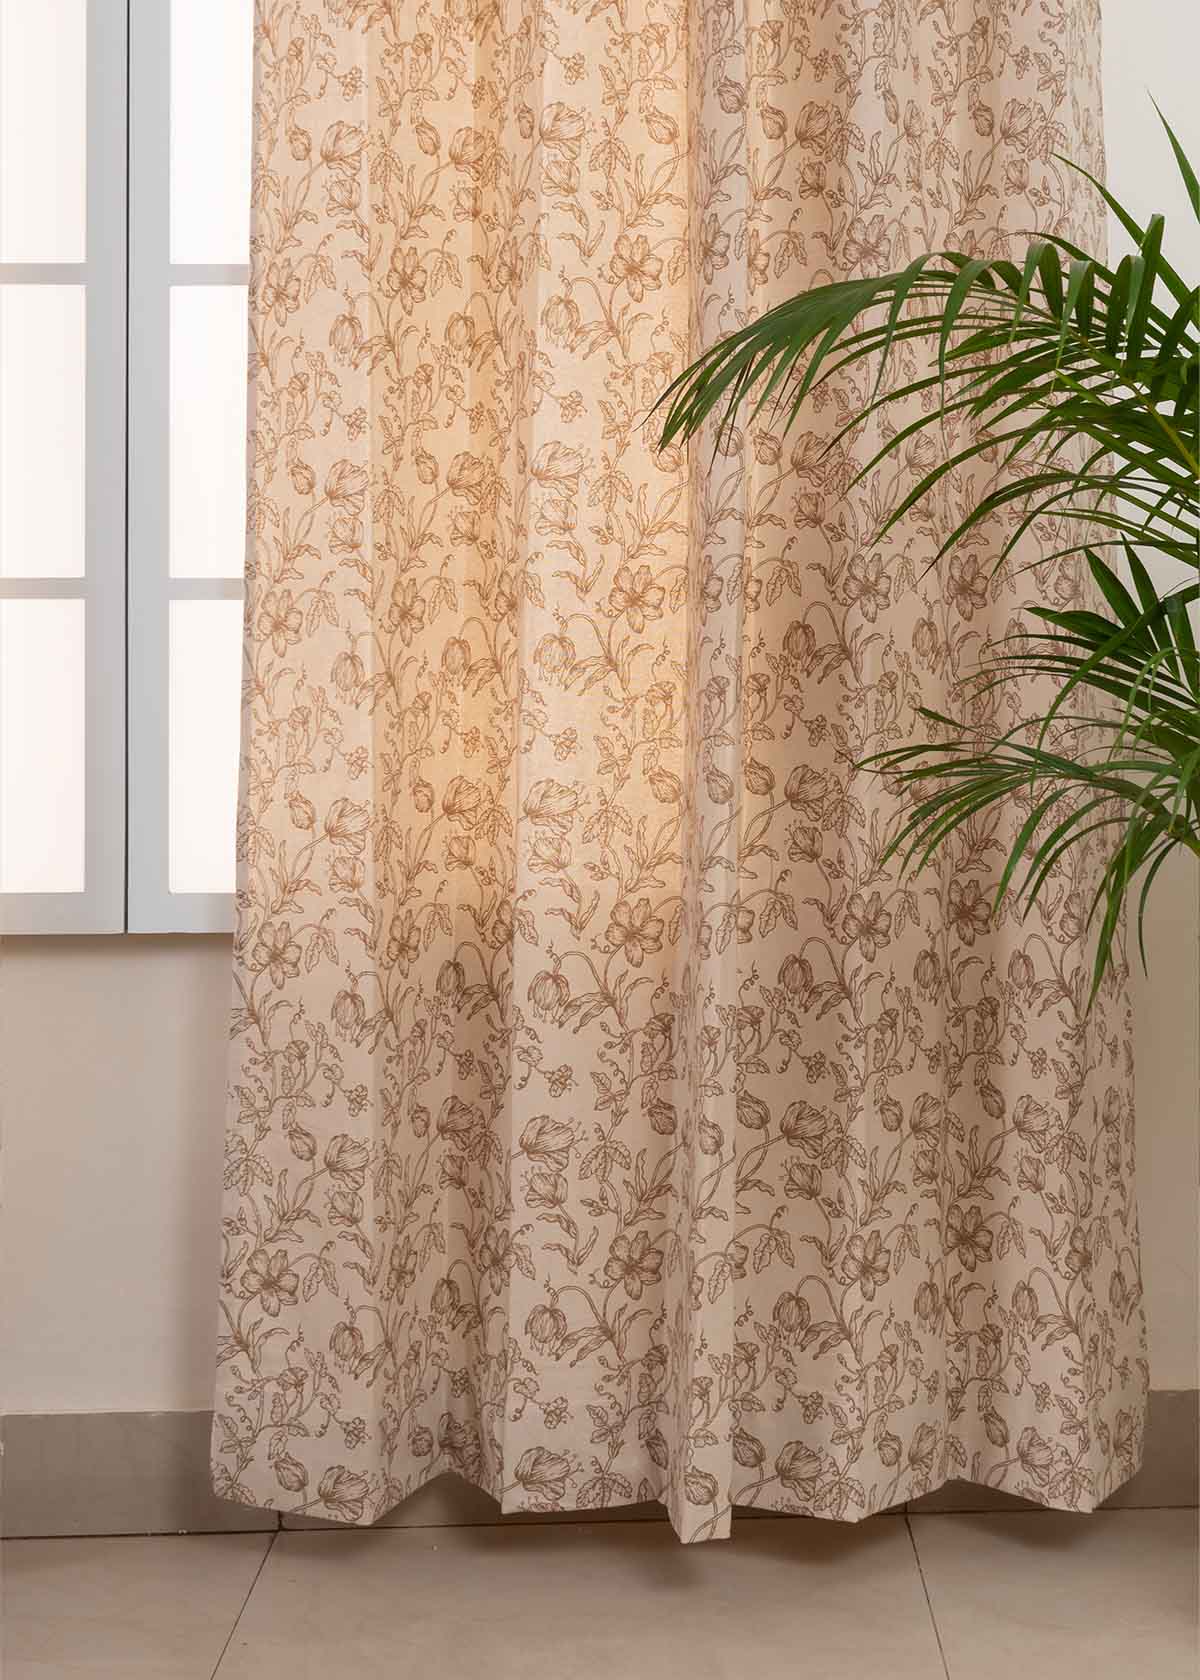 French Farmhouse 100% Customizable Cotton floral curtain for living room - Room darkening - Beige